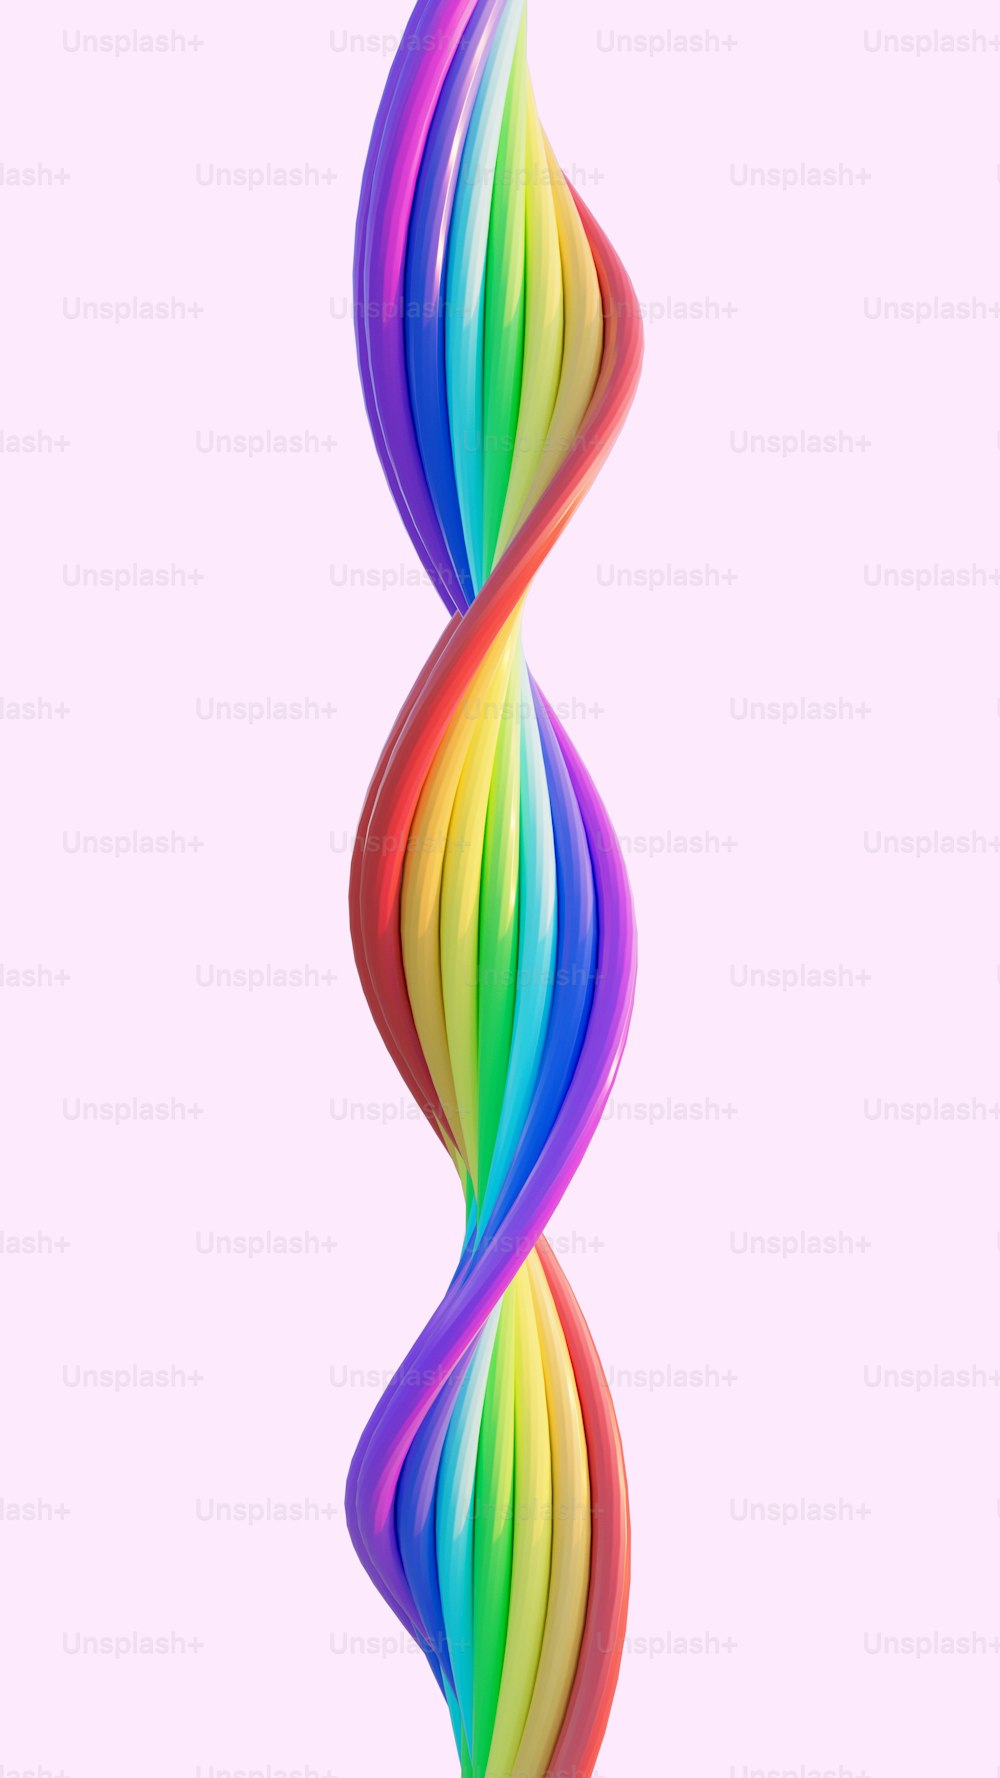 a multicolored spiral shaped object on a pink background